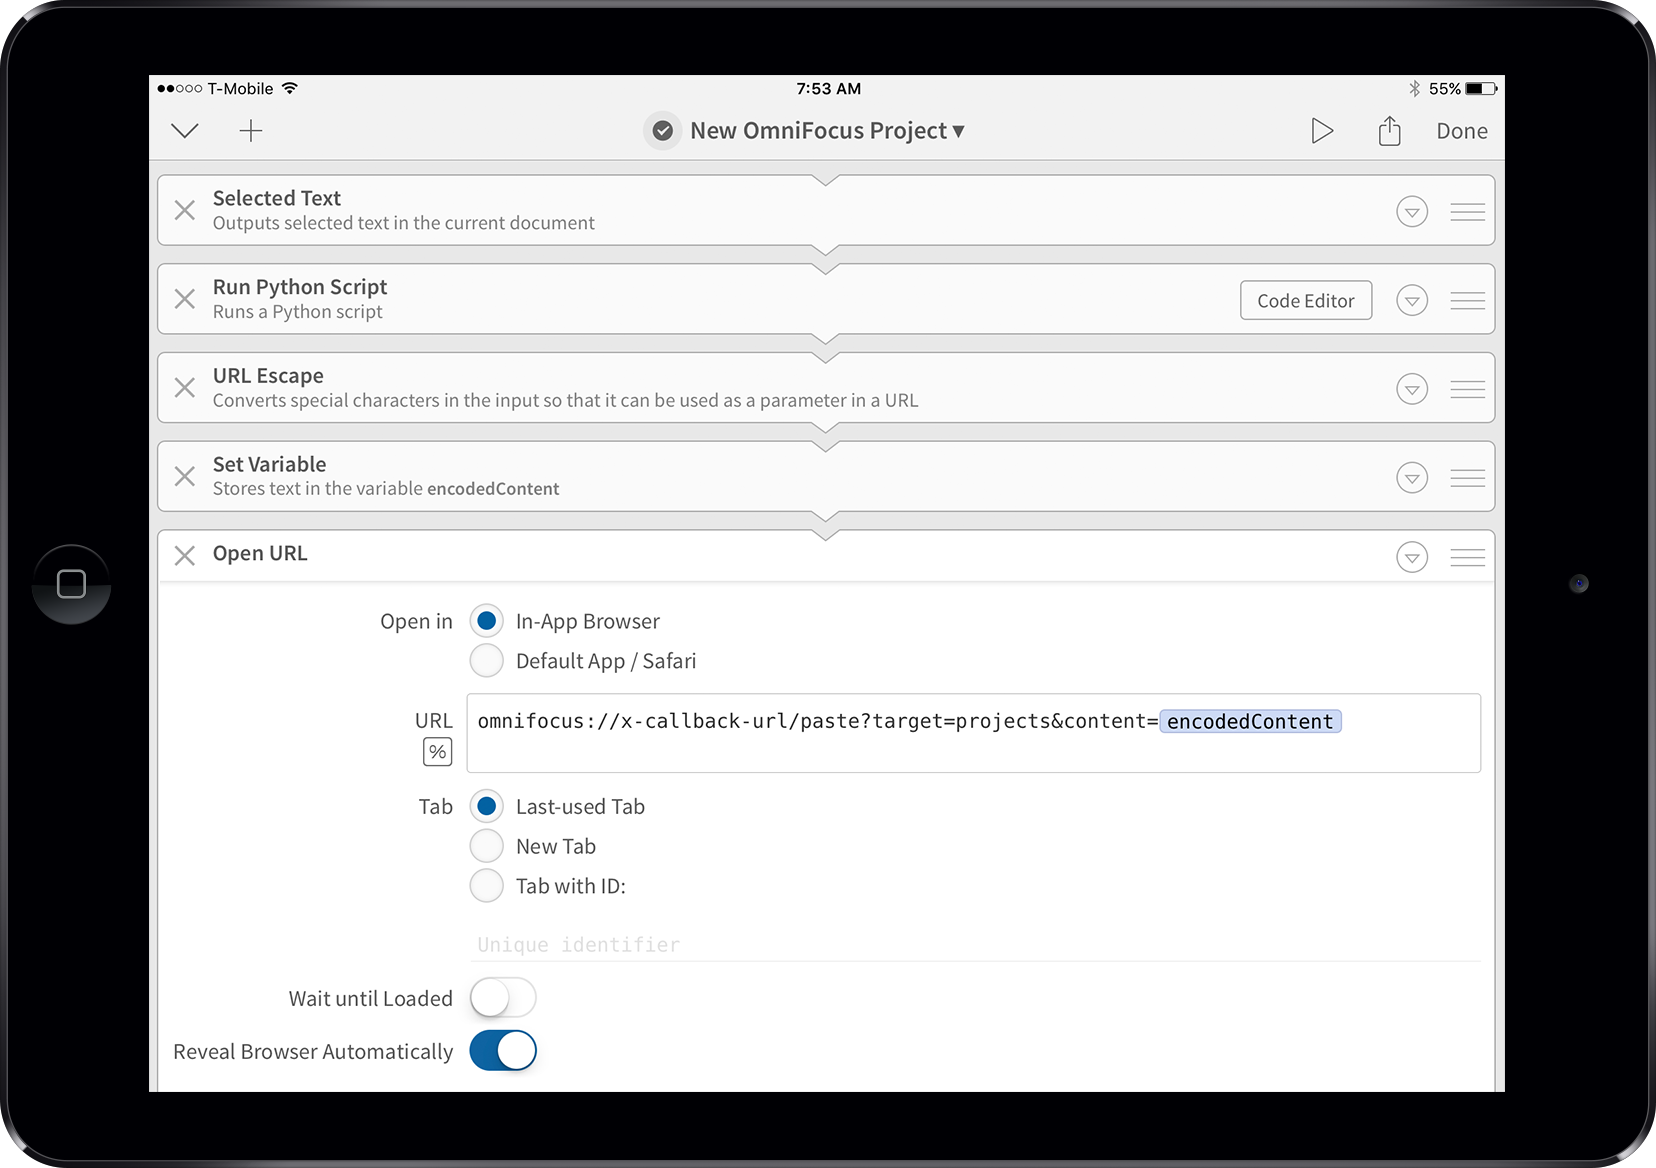 Screenshot showing a workflow in Editorial for iPad that processes text and sends it to OmniFocus 